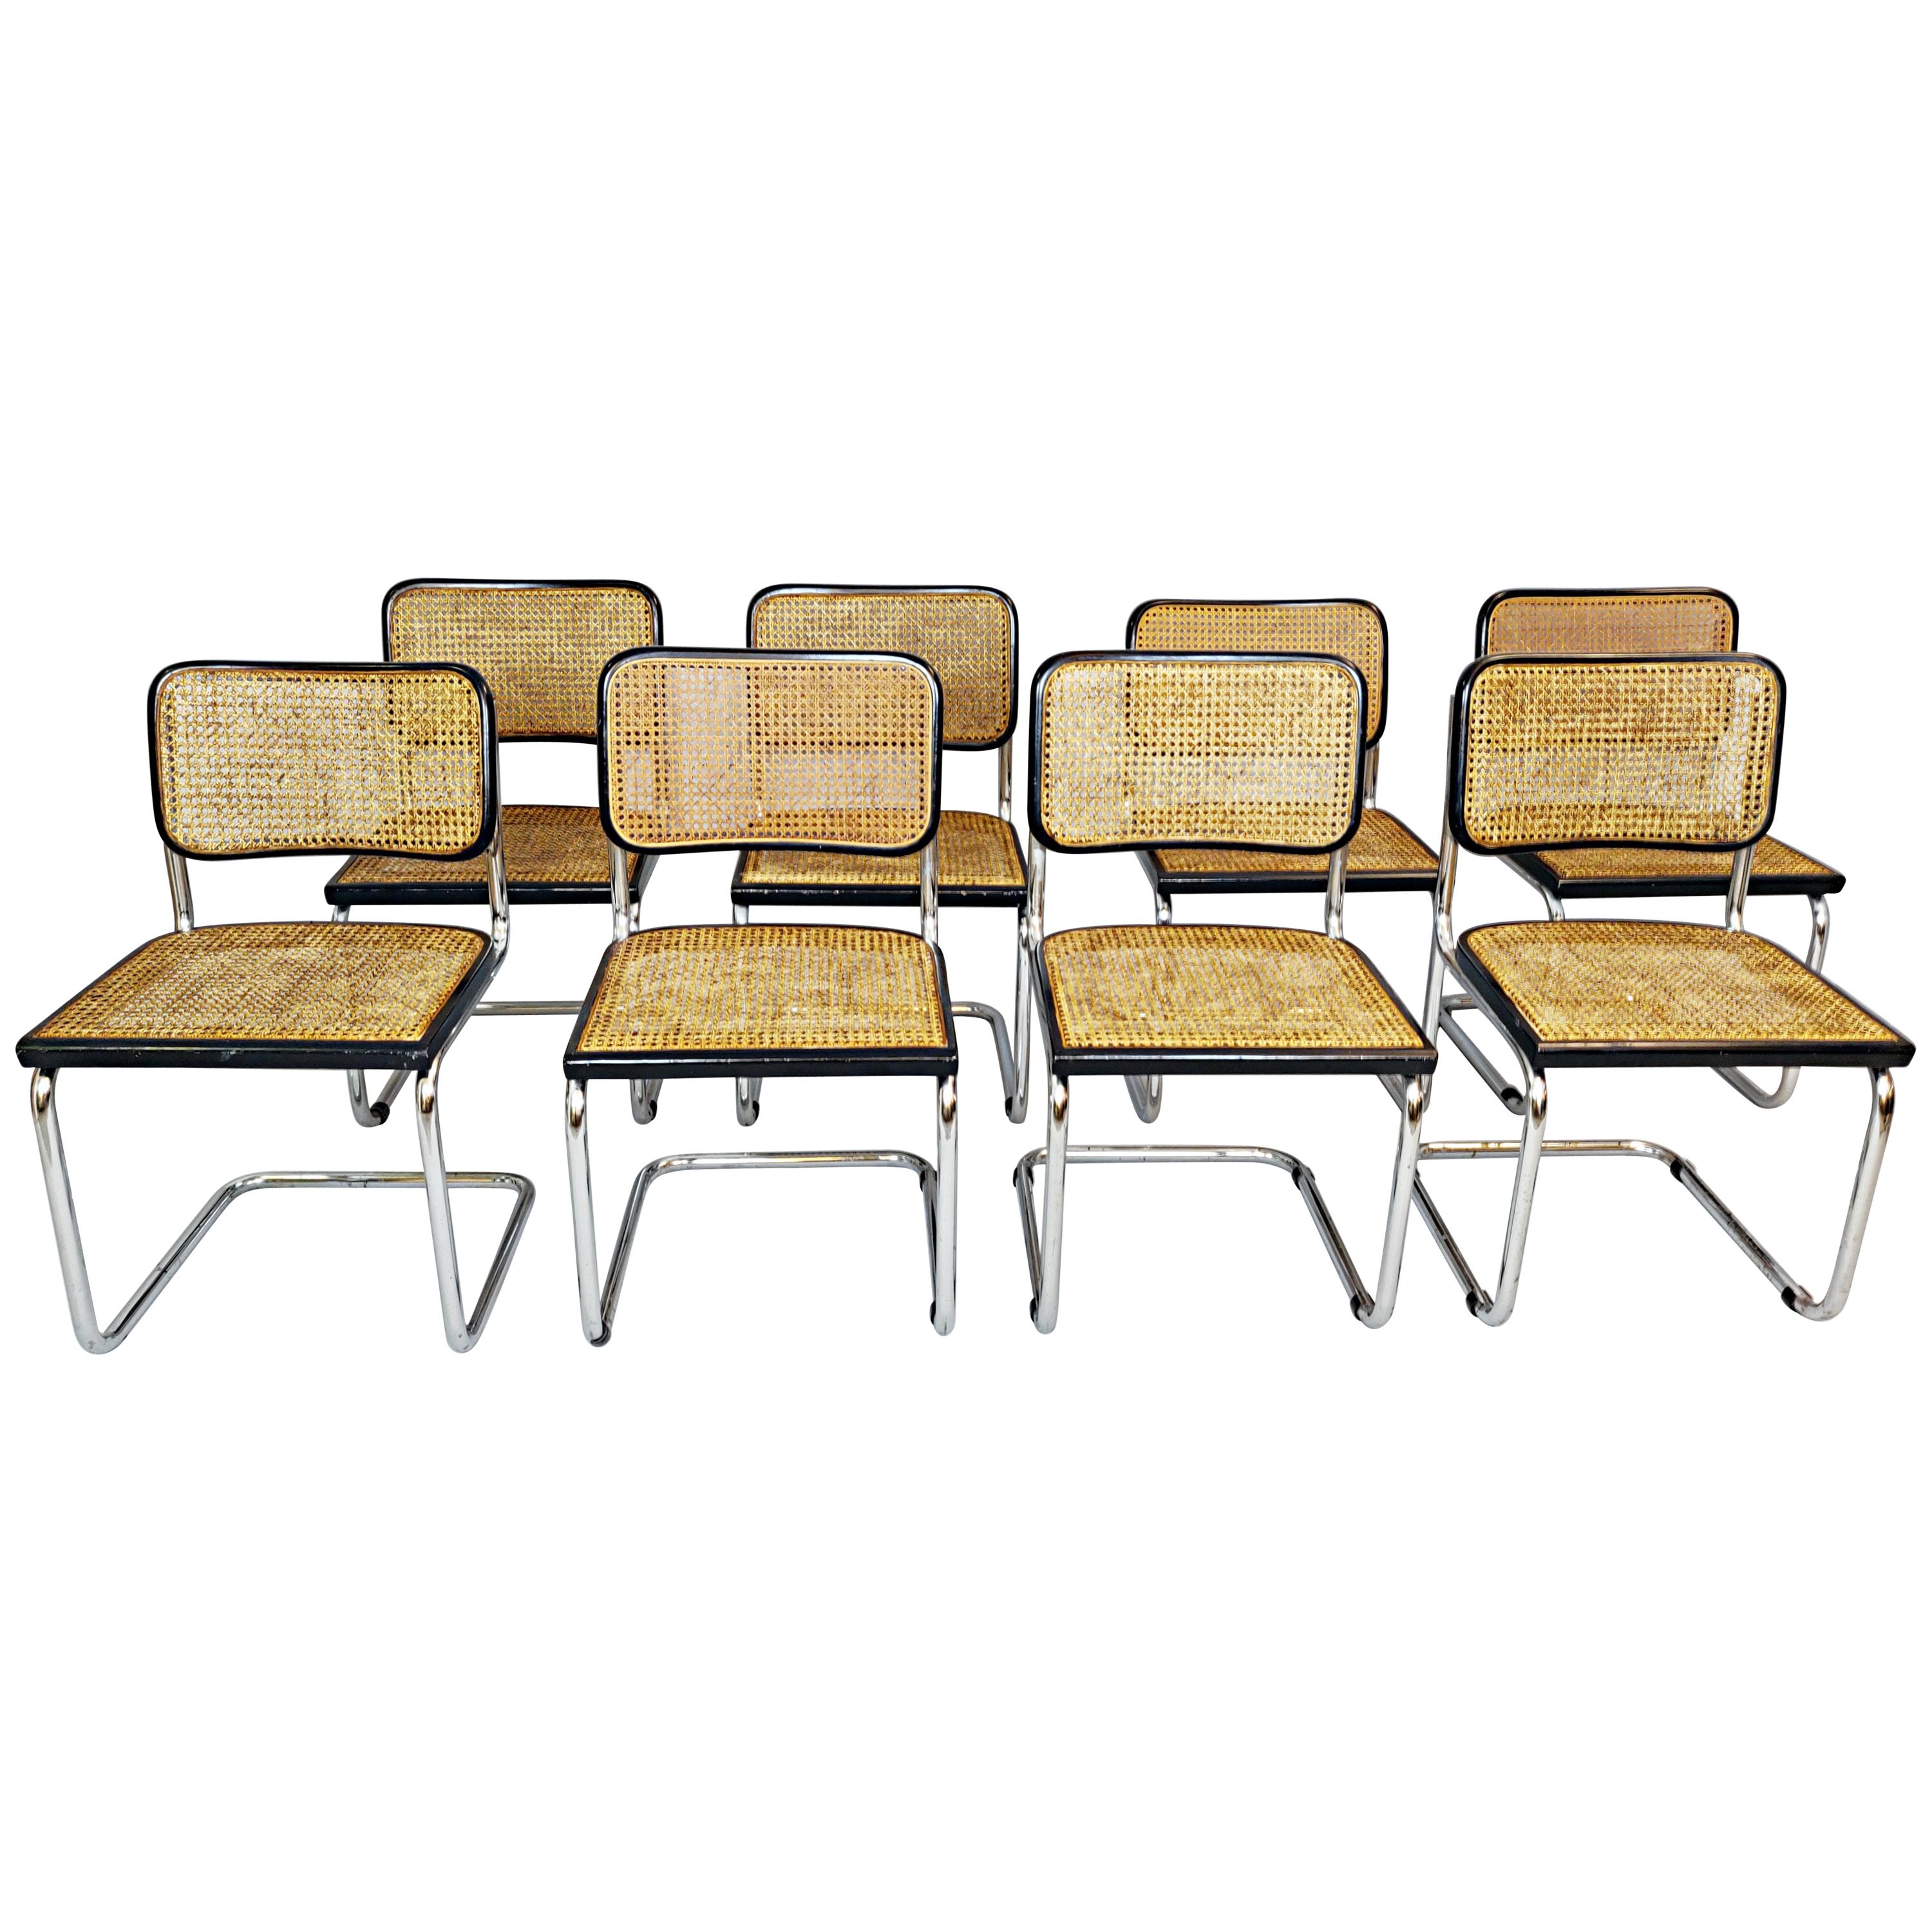 Set of 8 Cane Webbing Chairs after Marcel Breuer, Italy